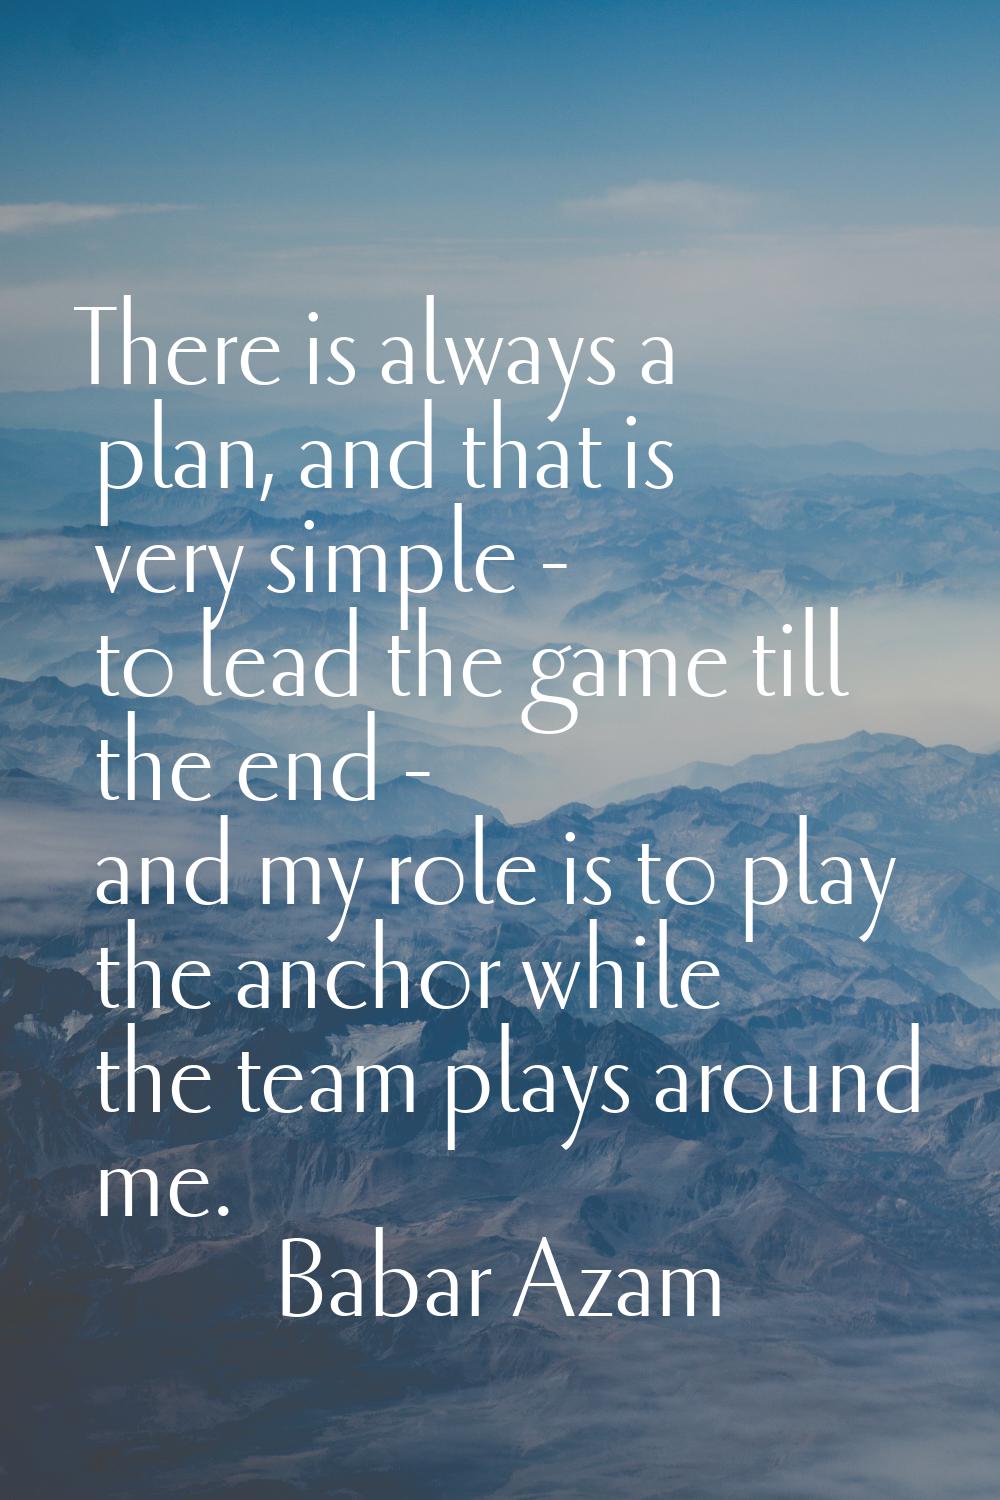 There is always a plan, and that is very simple - to lead the game till the end - and my role is to